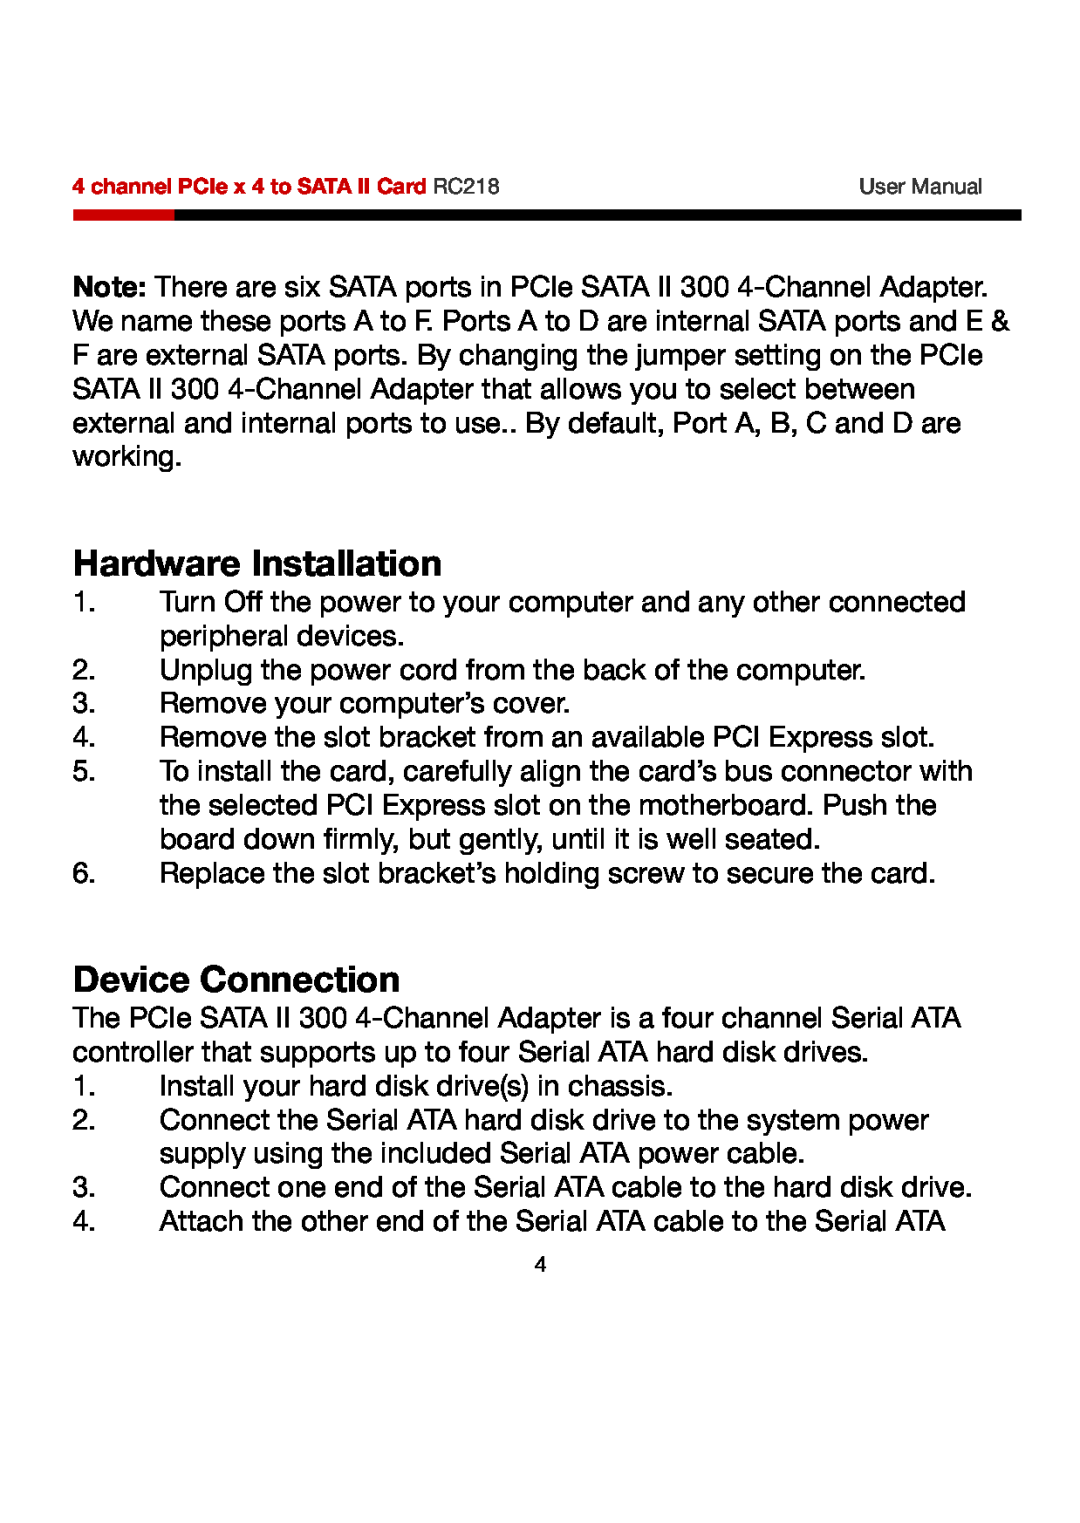 Rosewill RC218 user manual Hardware Installation, Device Connection 